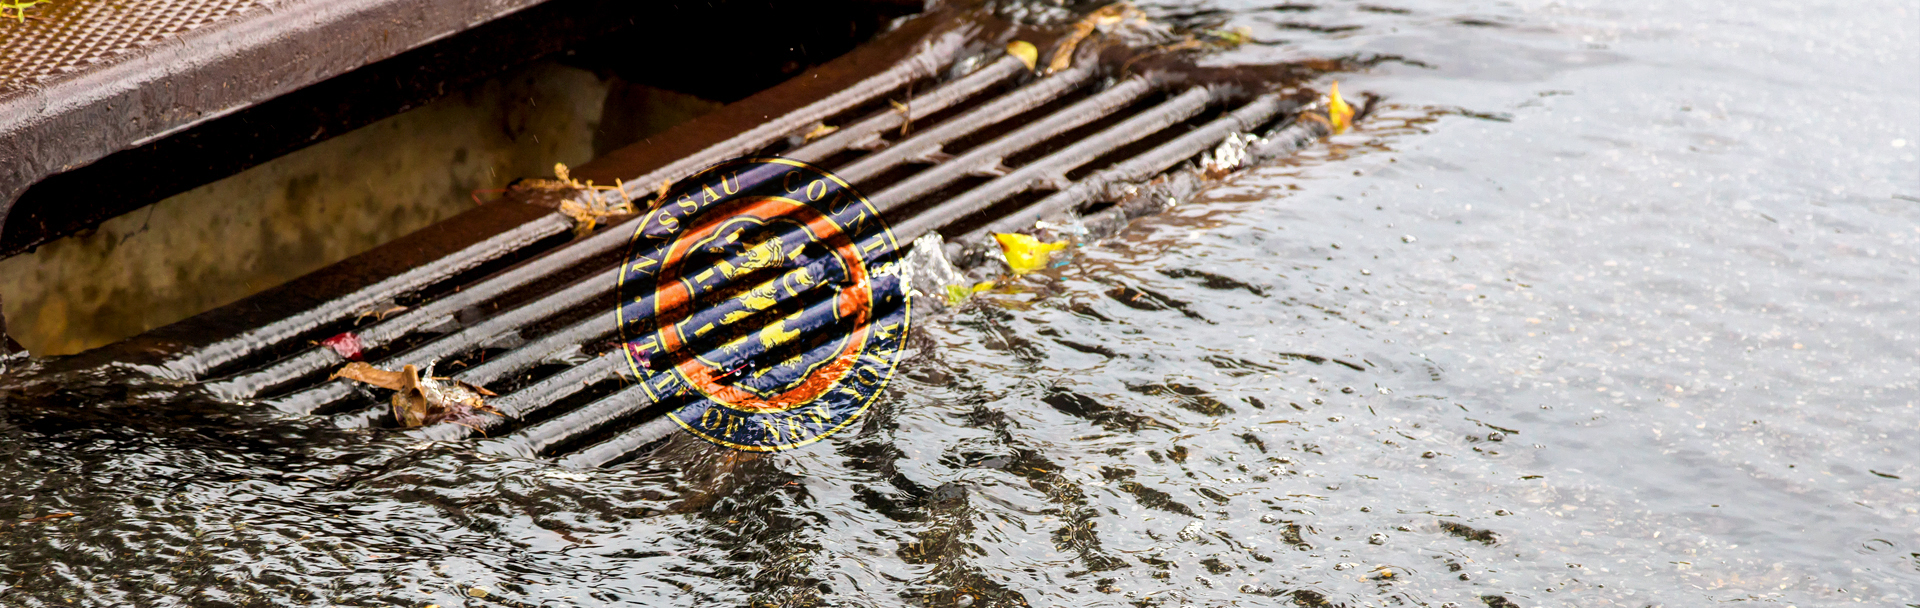 All Storm Drains Inc. | Parking Lot Catch Basin Drainage Service  | Nassau County, Long Island, NY | Phone: 516.825.1010 Fax: 631.475.2898 | George@AllStormDrains.com